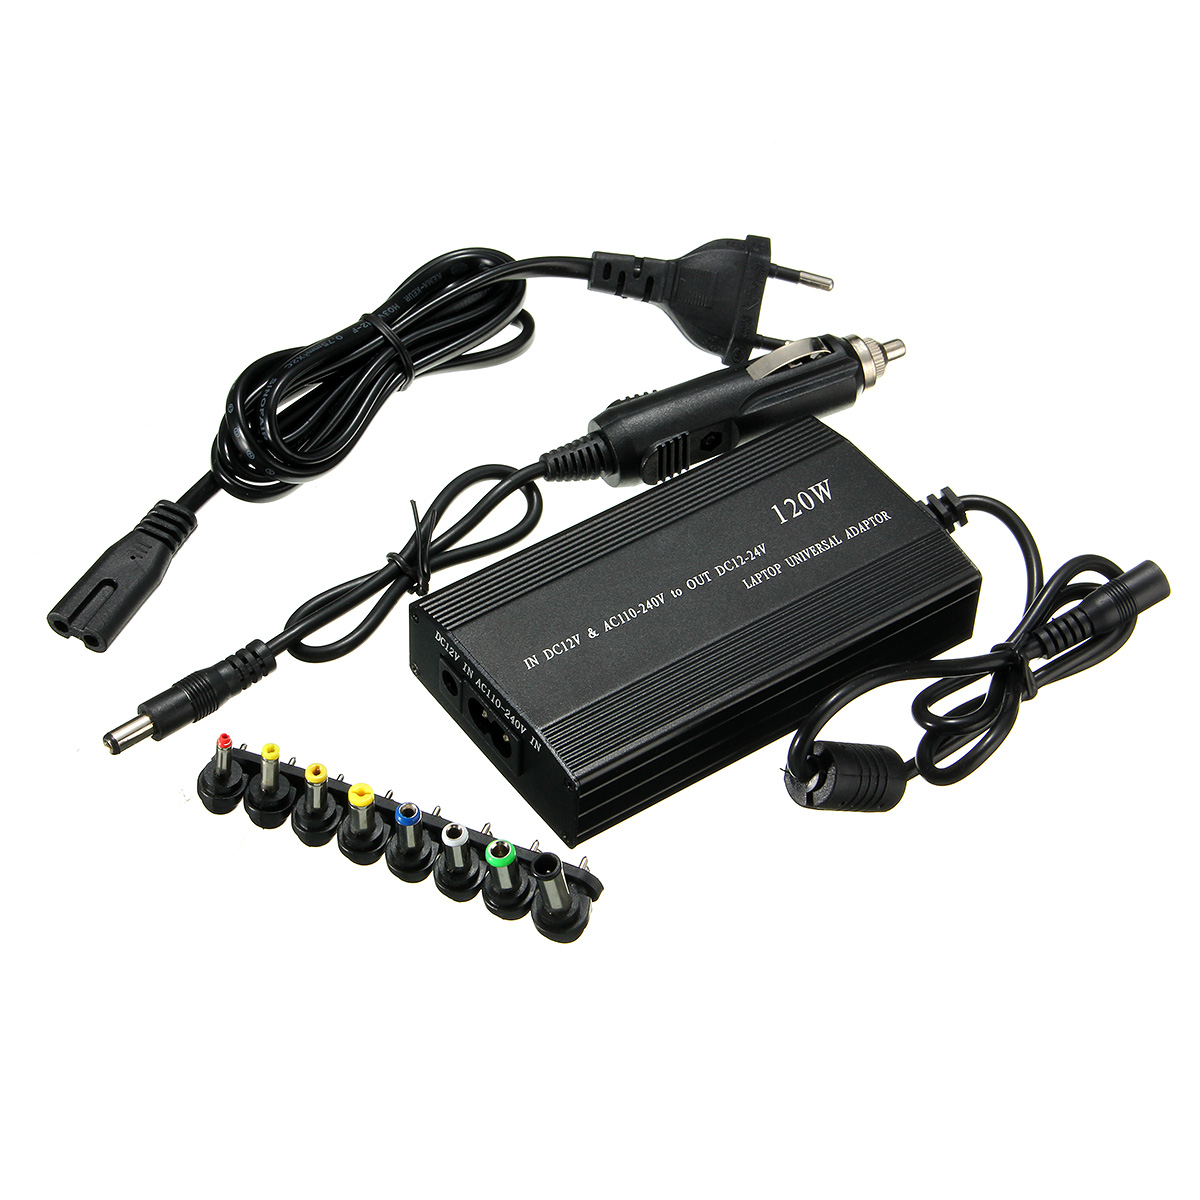 

120W Multi-used Universal Laptop Charger AC Adapter Power Supply EU Plug